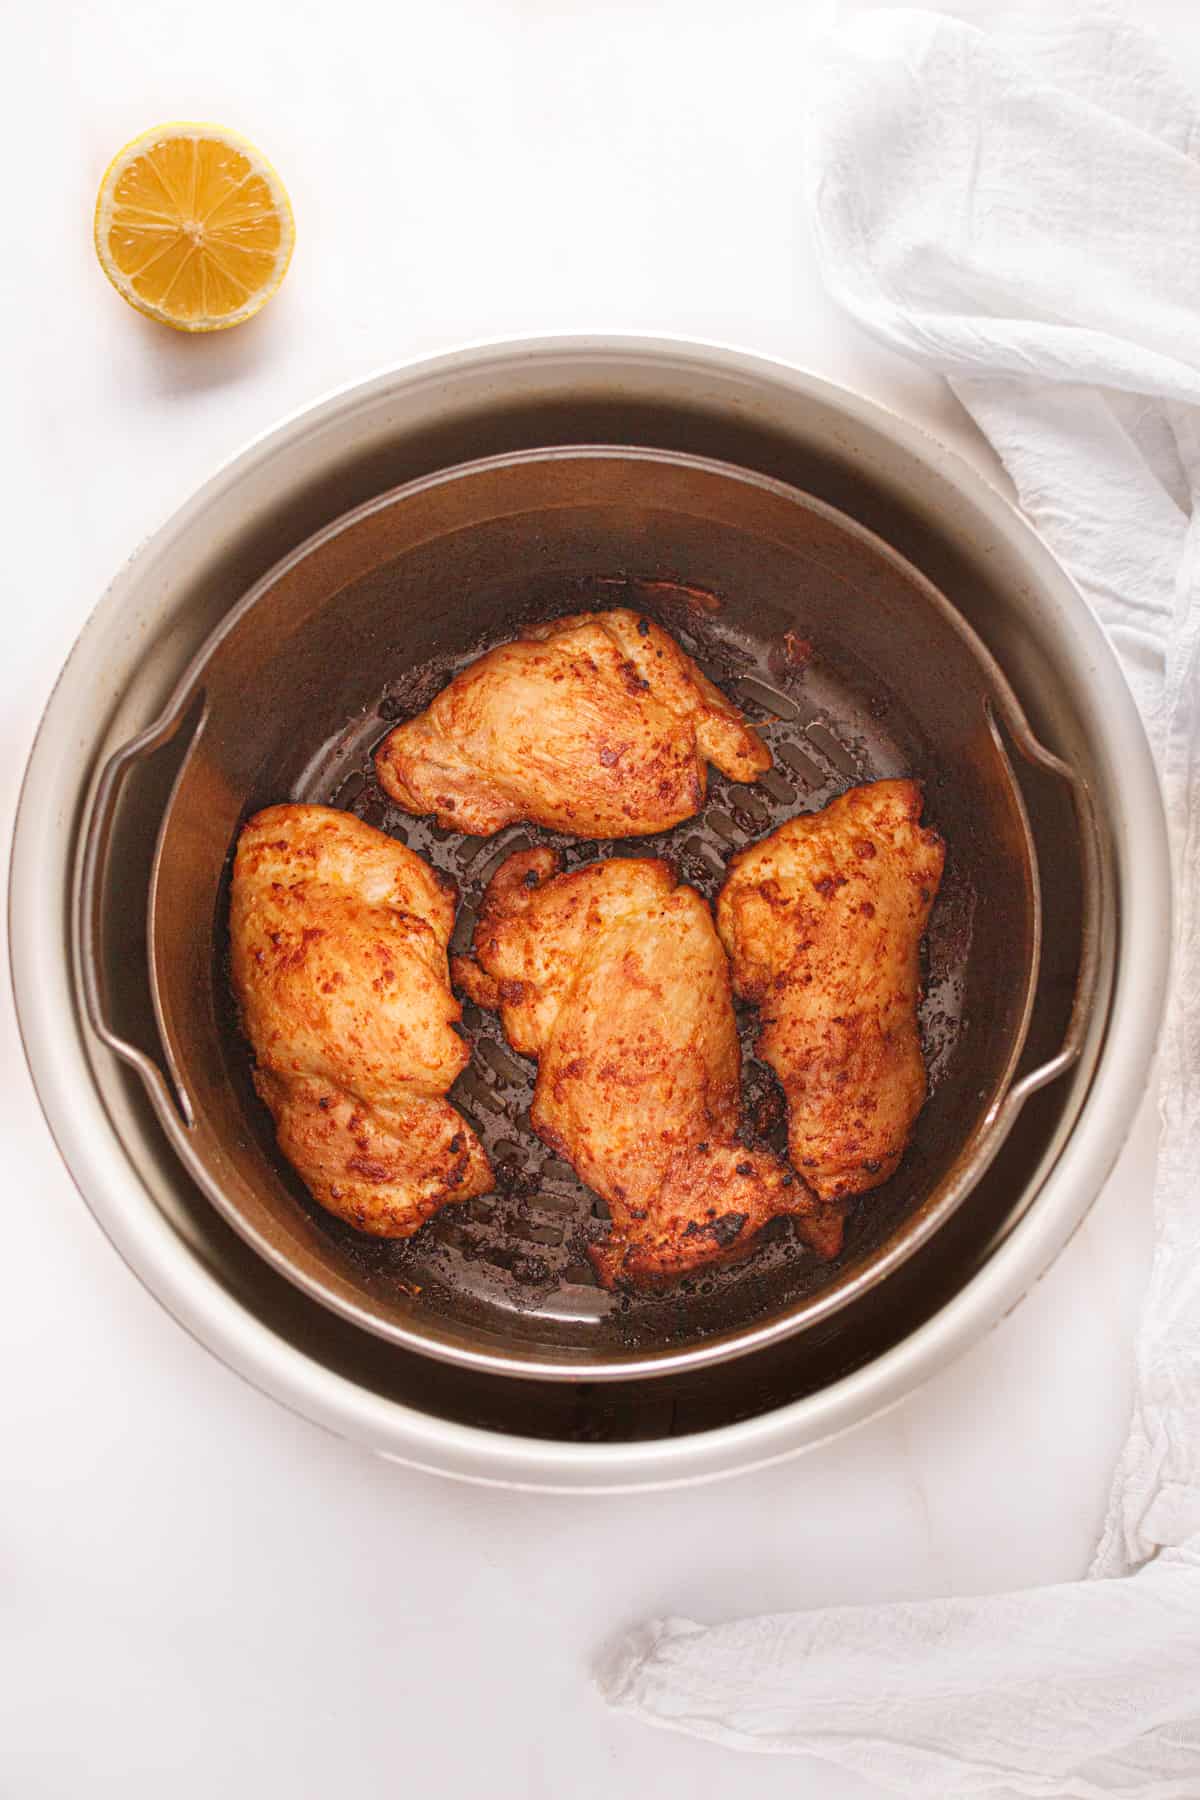 Cooked chicken thighs in the air fryer.